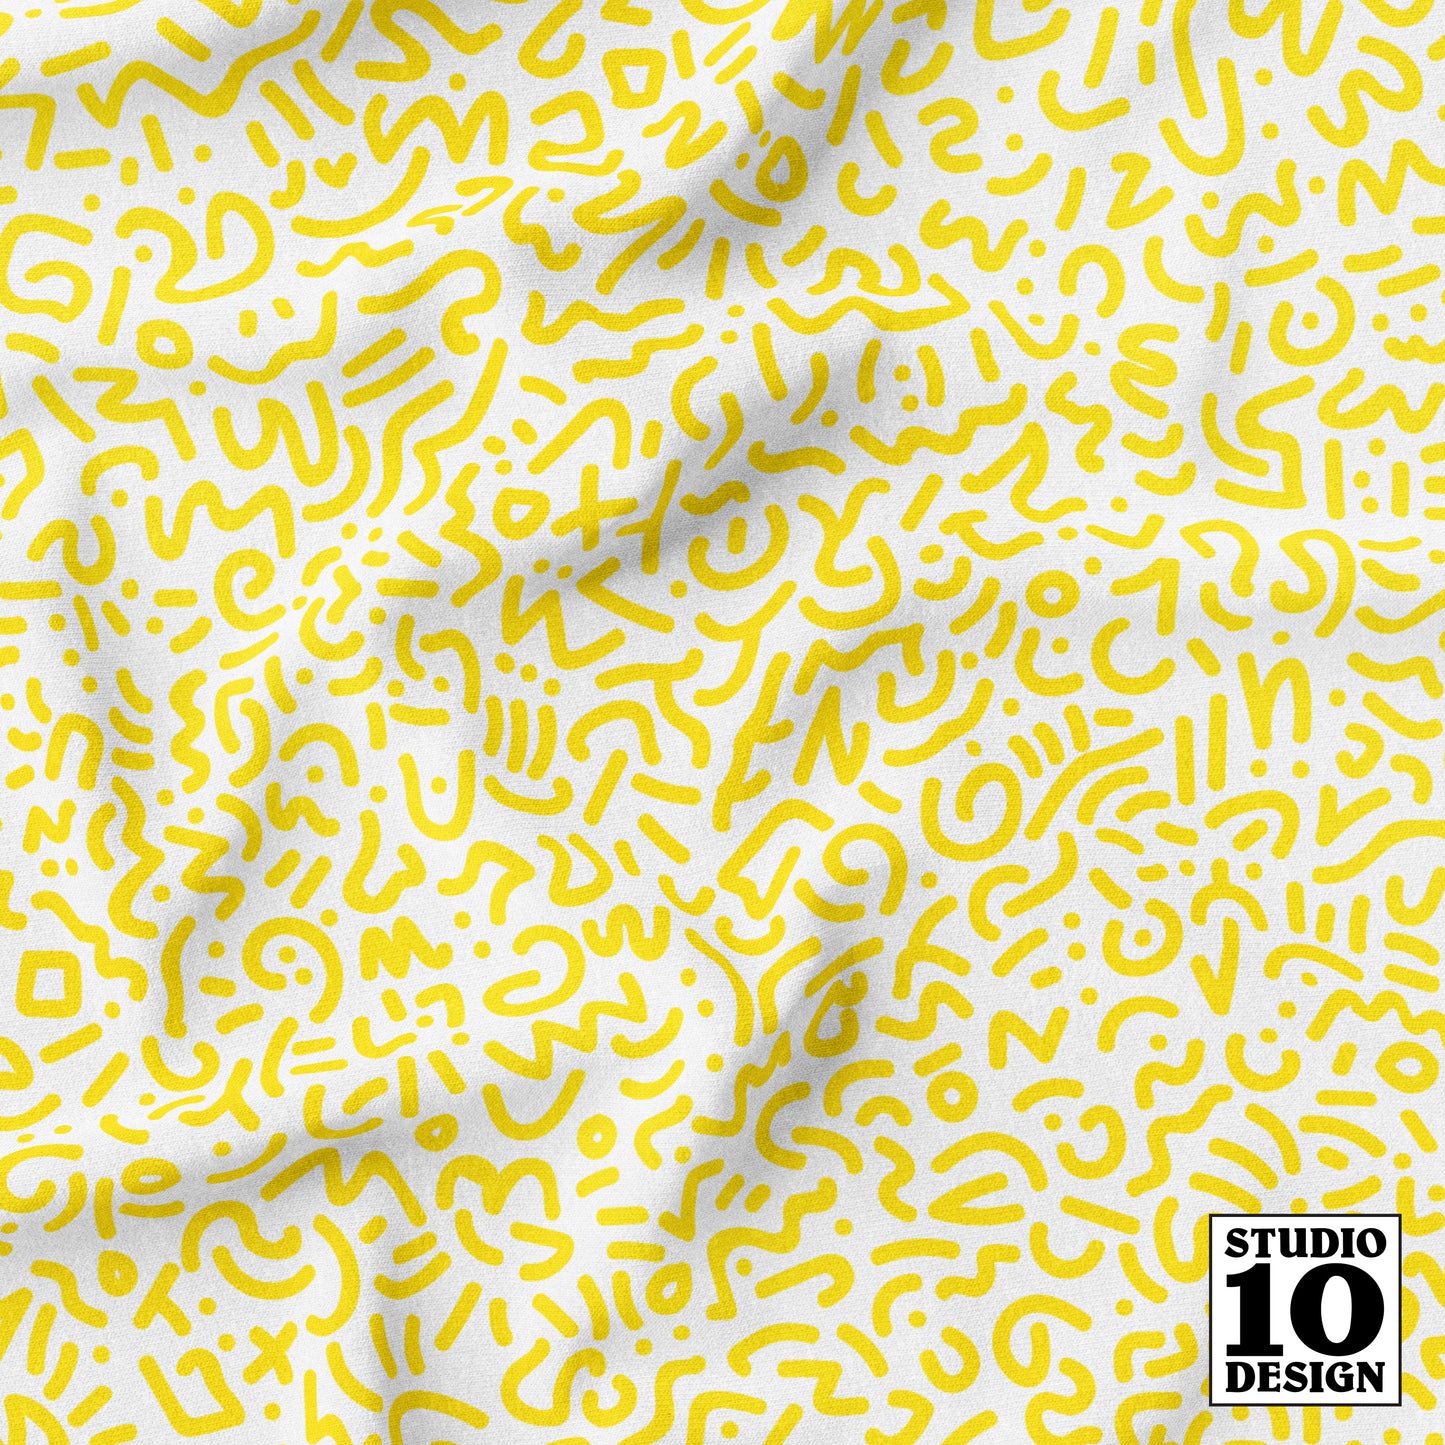 Doodle Yellow+White Printed Fabric by Studio Ten Design